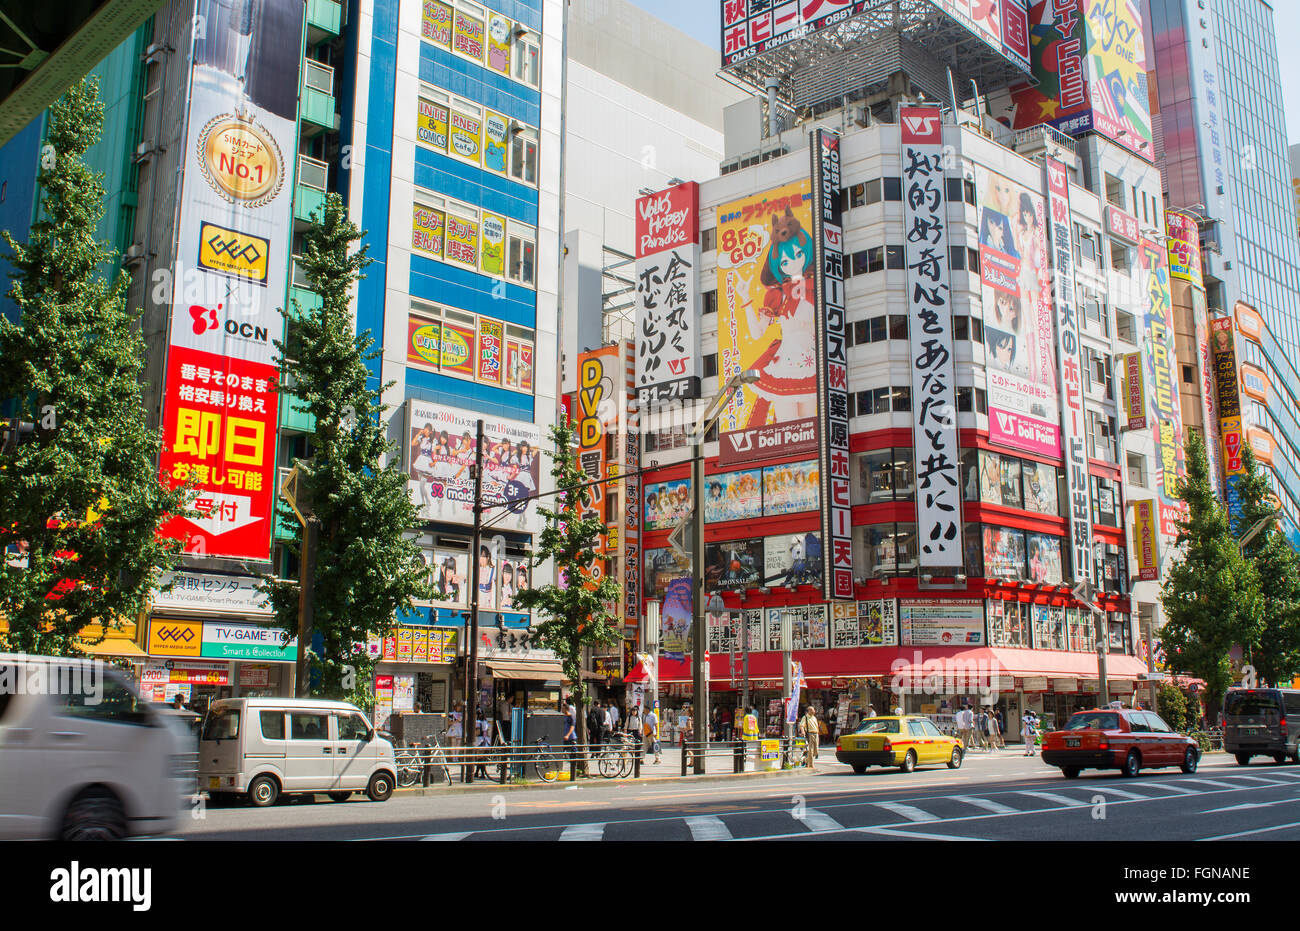 Tokyo Japan modern high tech area called Akihabara area to sell computer items and cartoon type games called Electric Town video Stock Photo